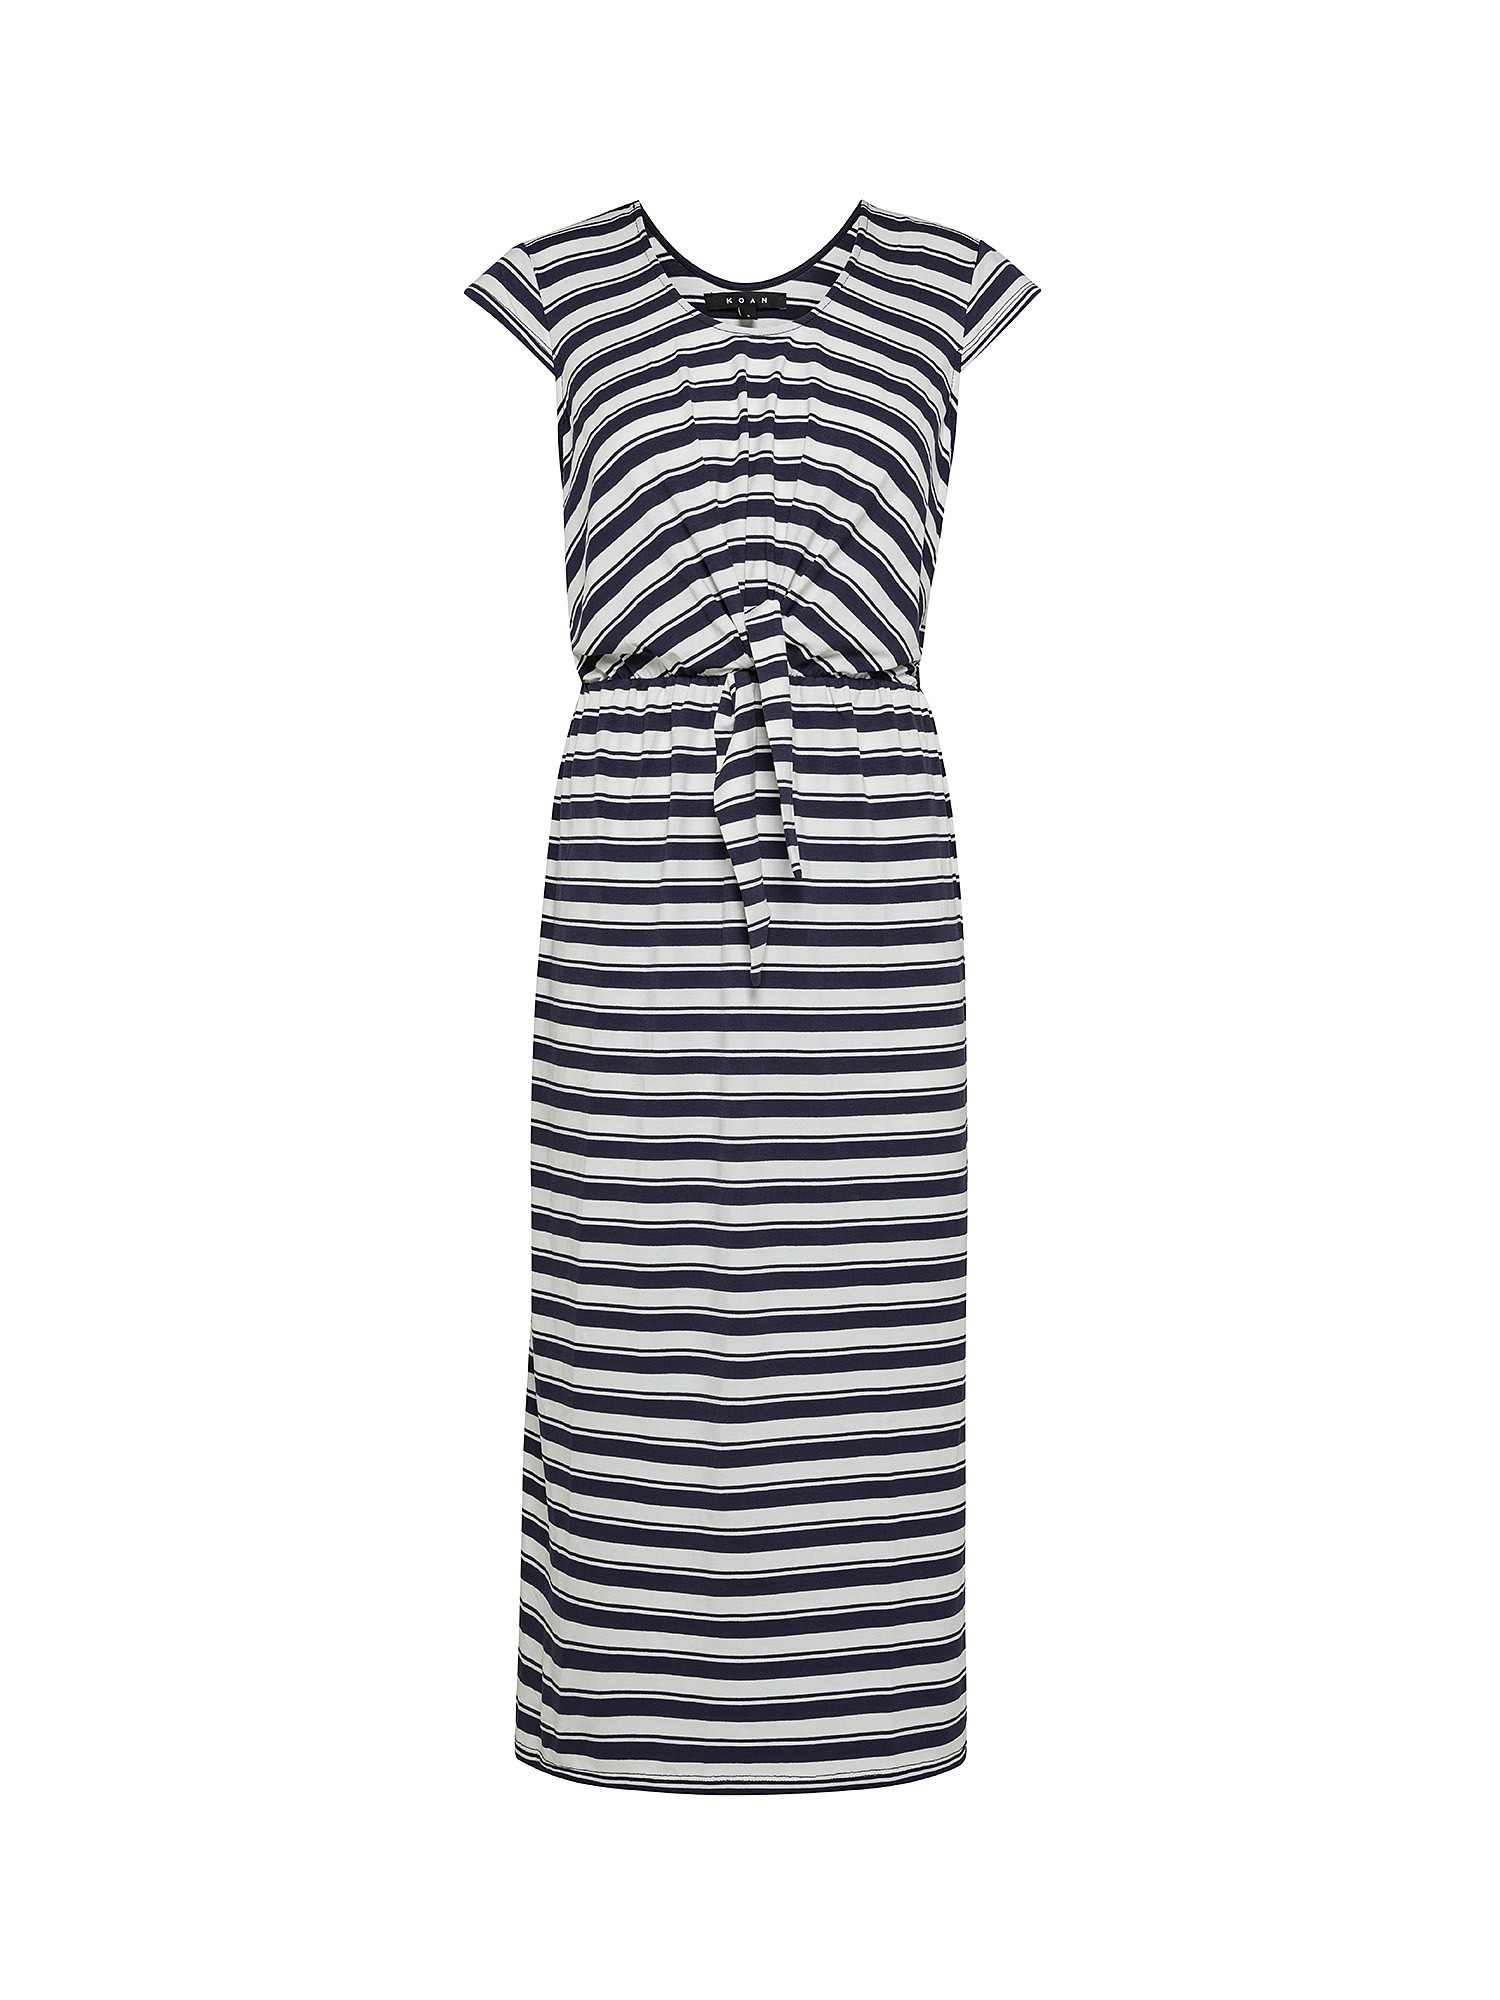 Striped jersey dress, White, large image number 0